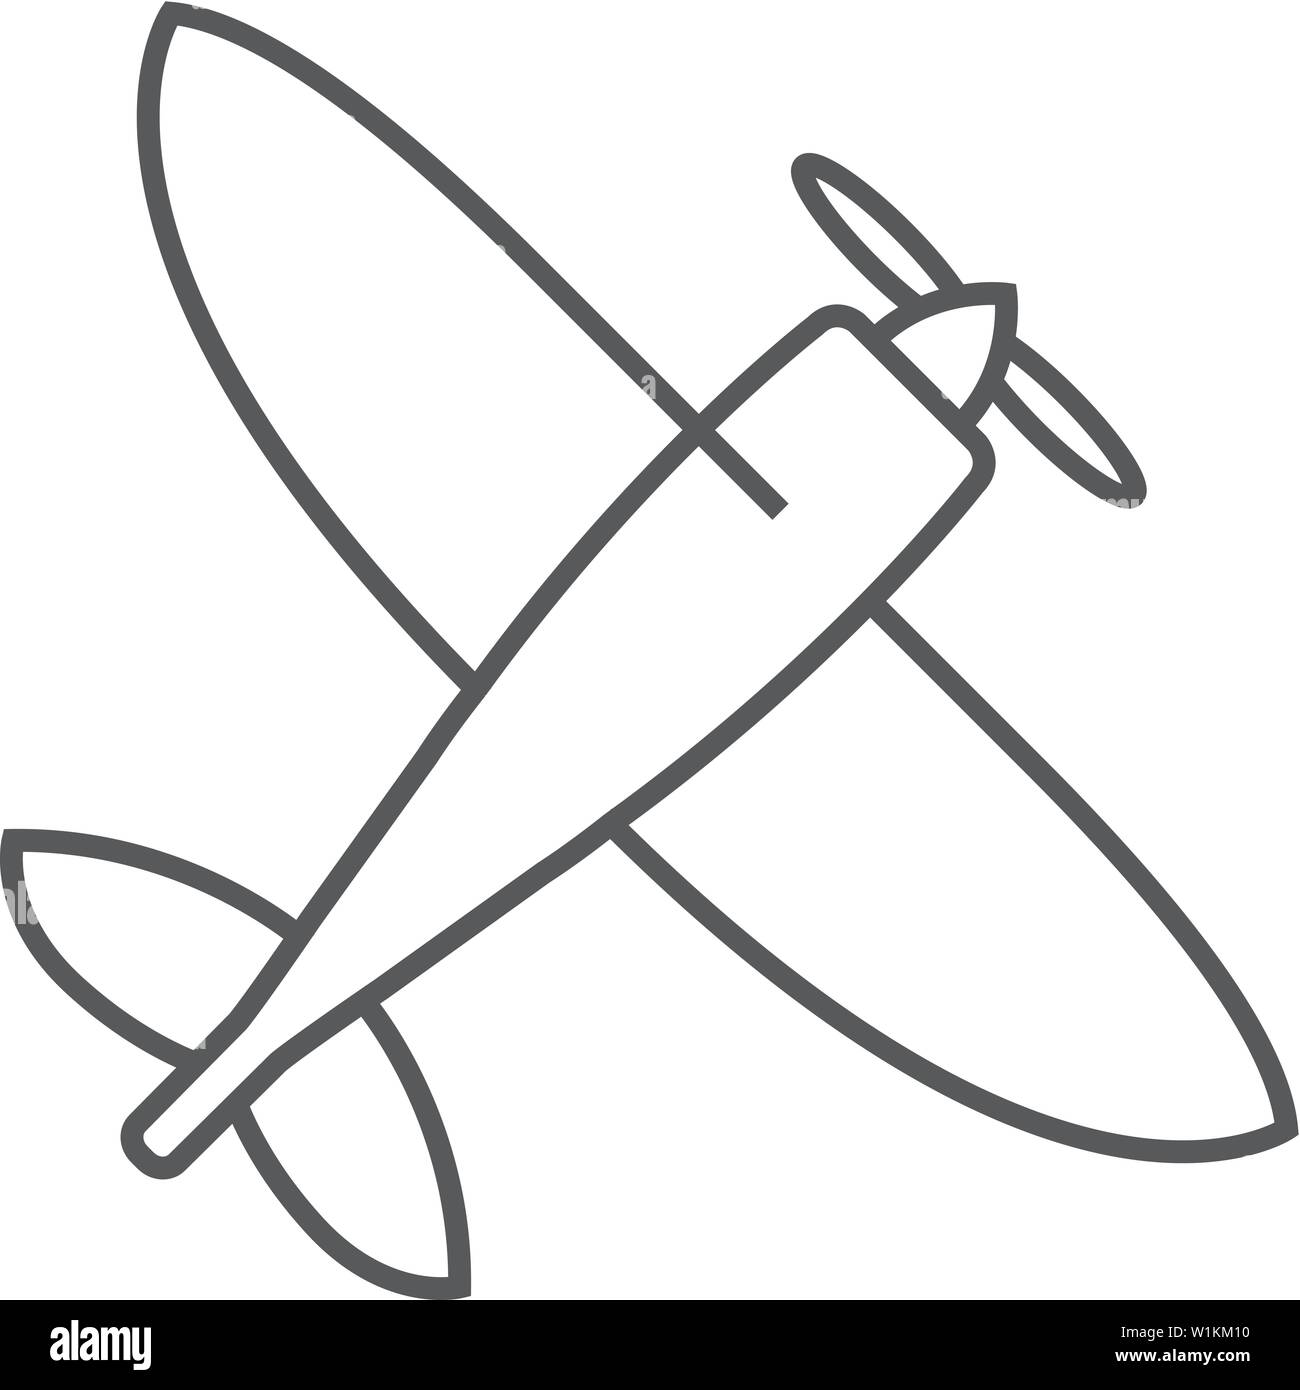 Old airplane biplane engraving vector Old airplane biplane vector  illustration scratch board style imitation hand drawn  CanStock